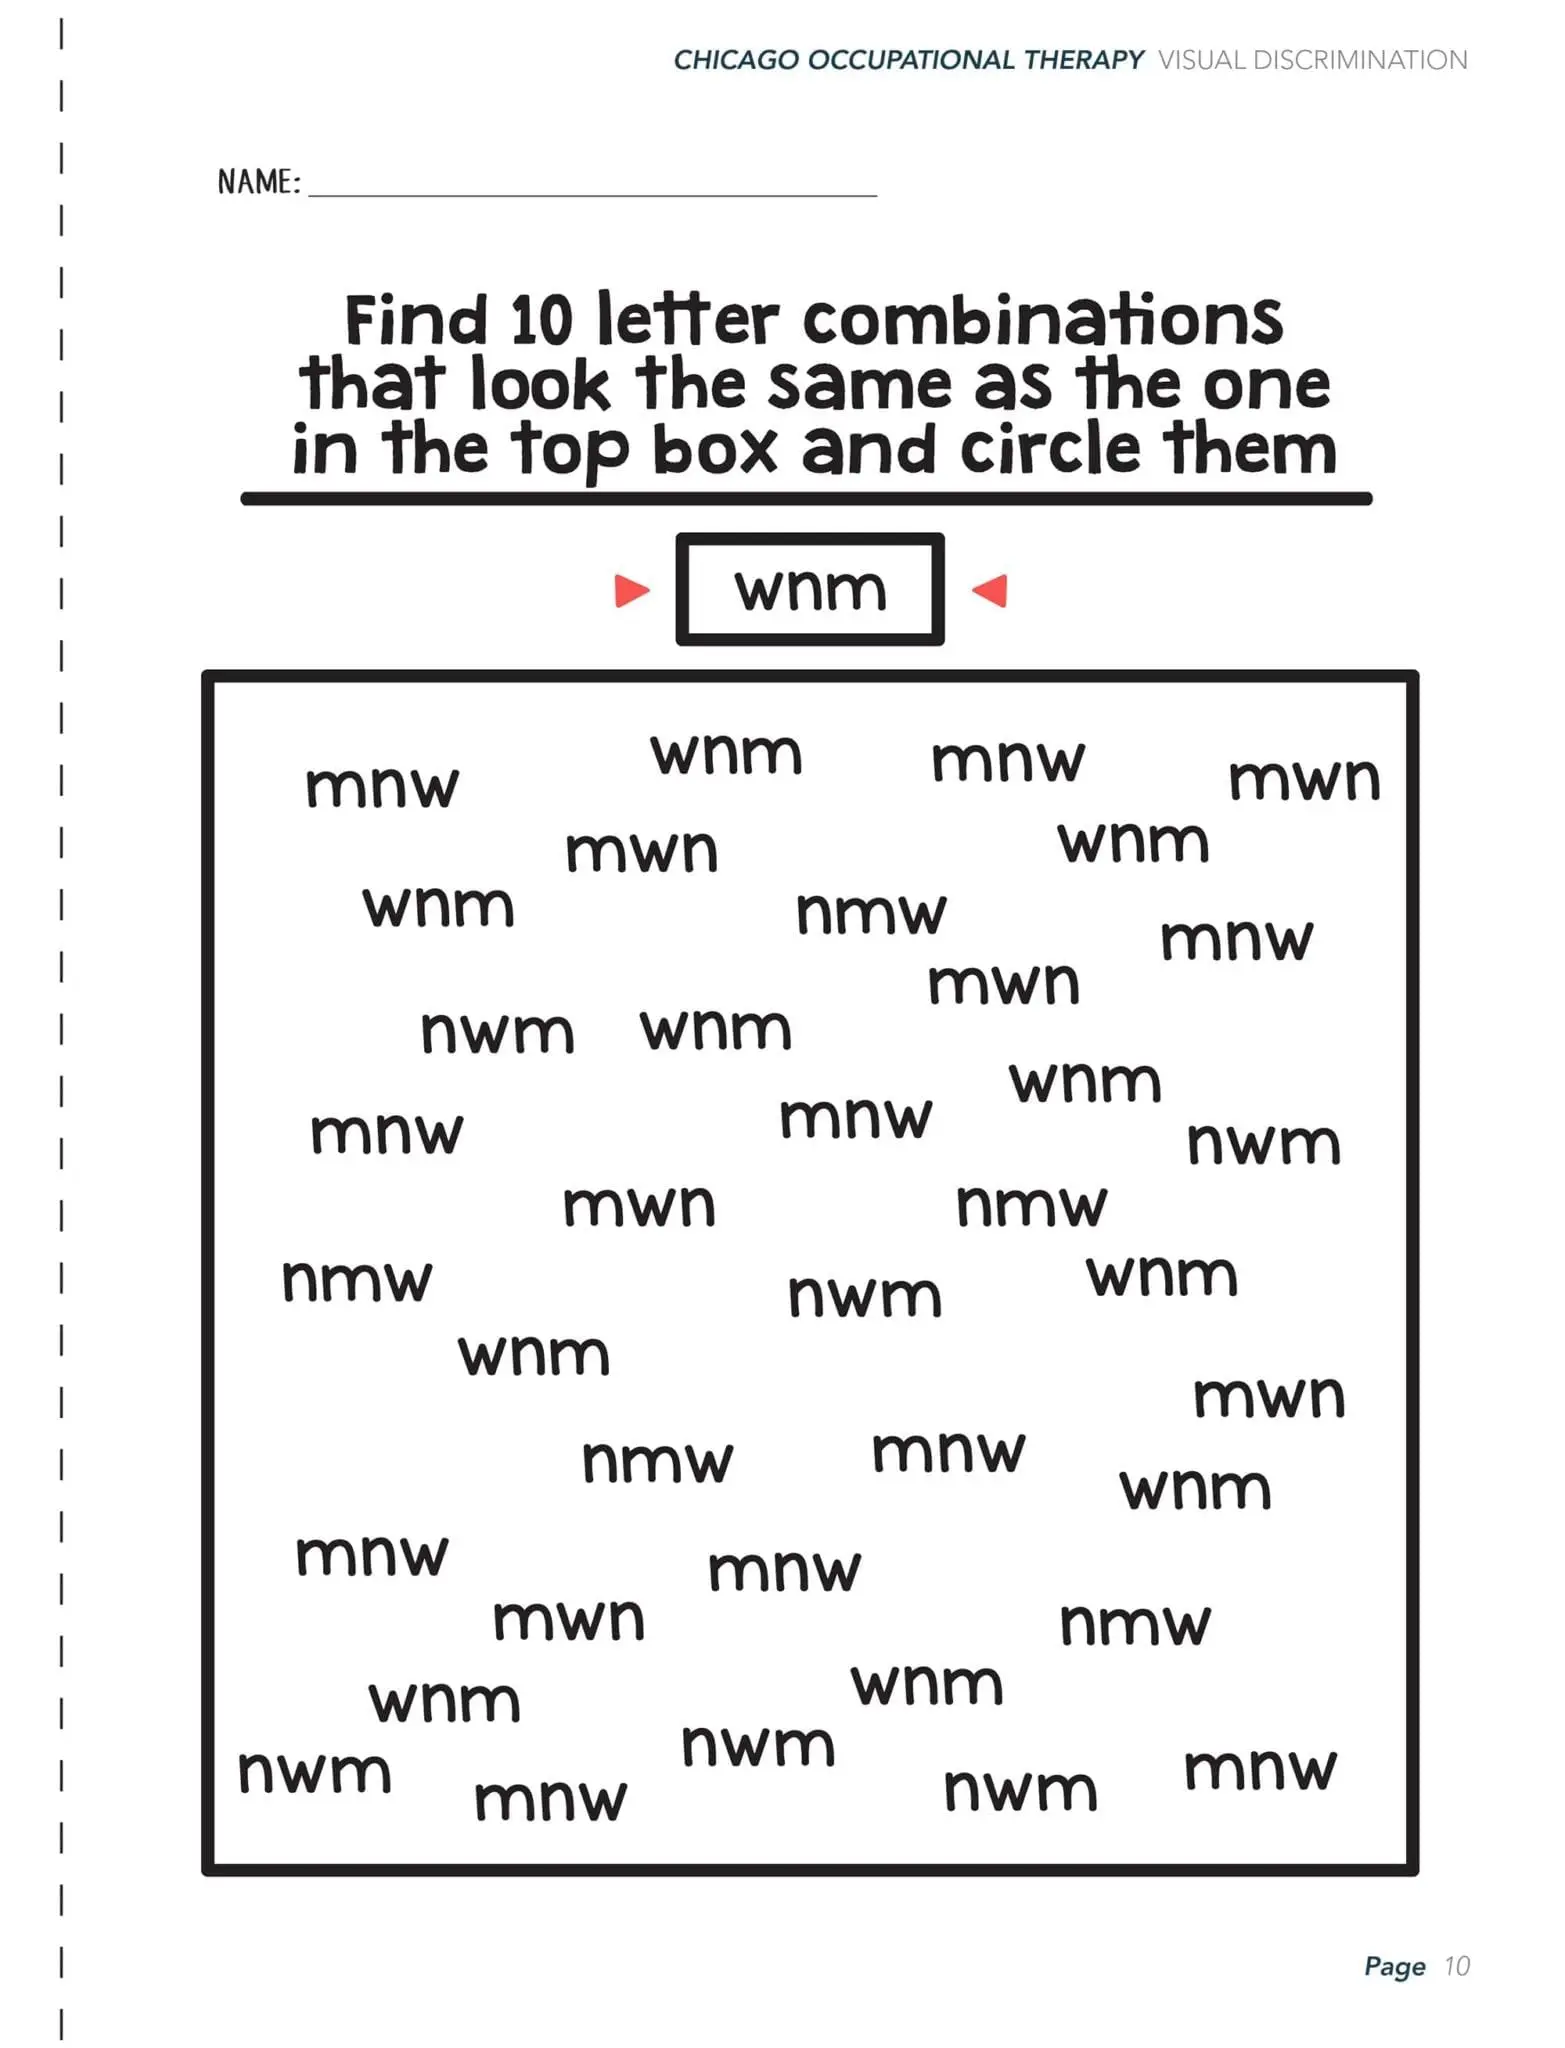 free-printable-visual-scanning-worksheets-printable-form-templates-and-letter